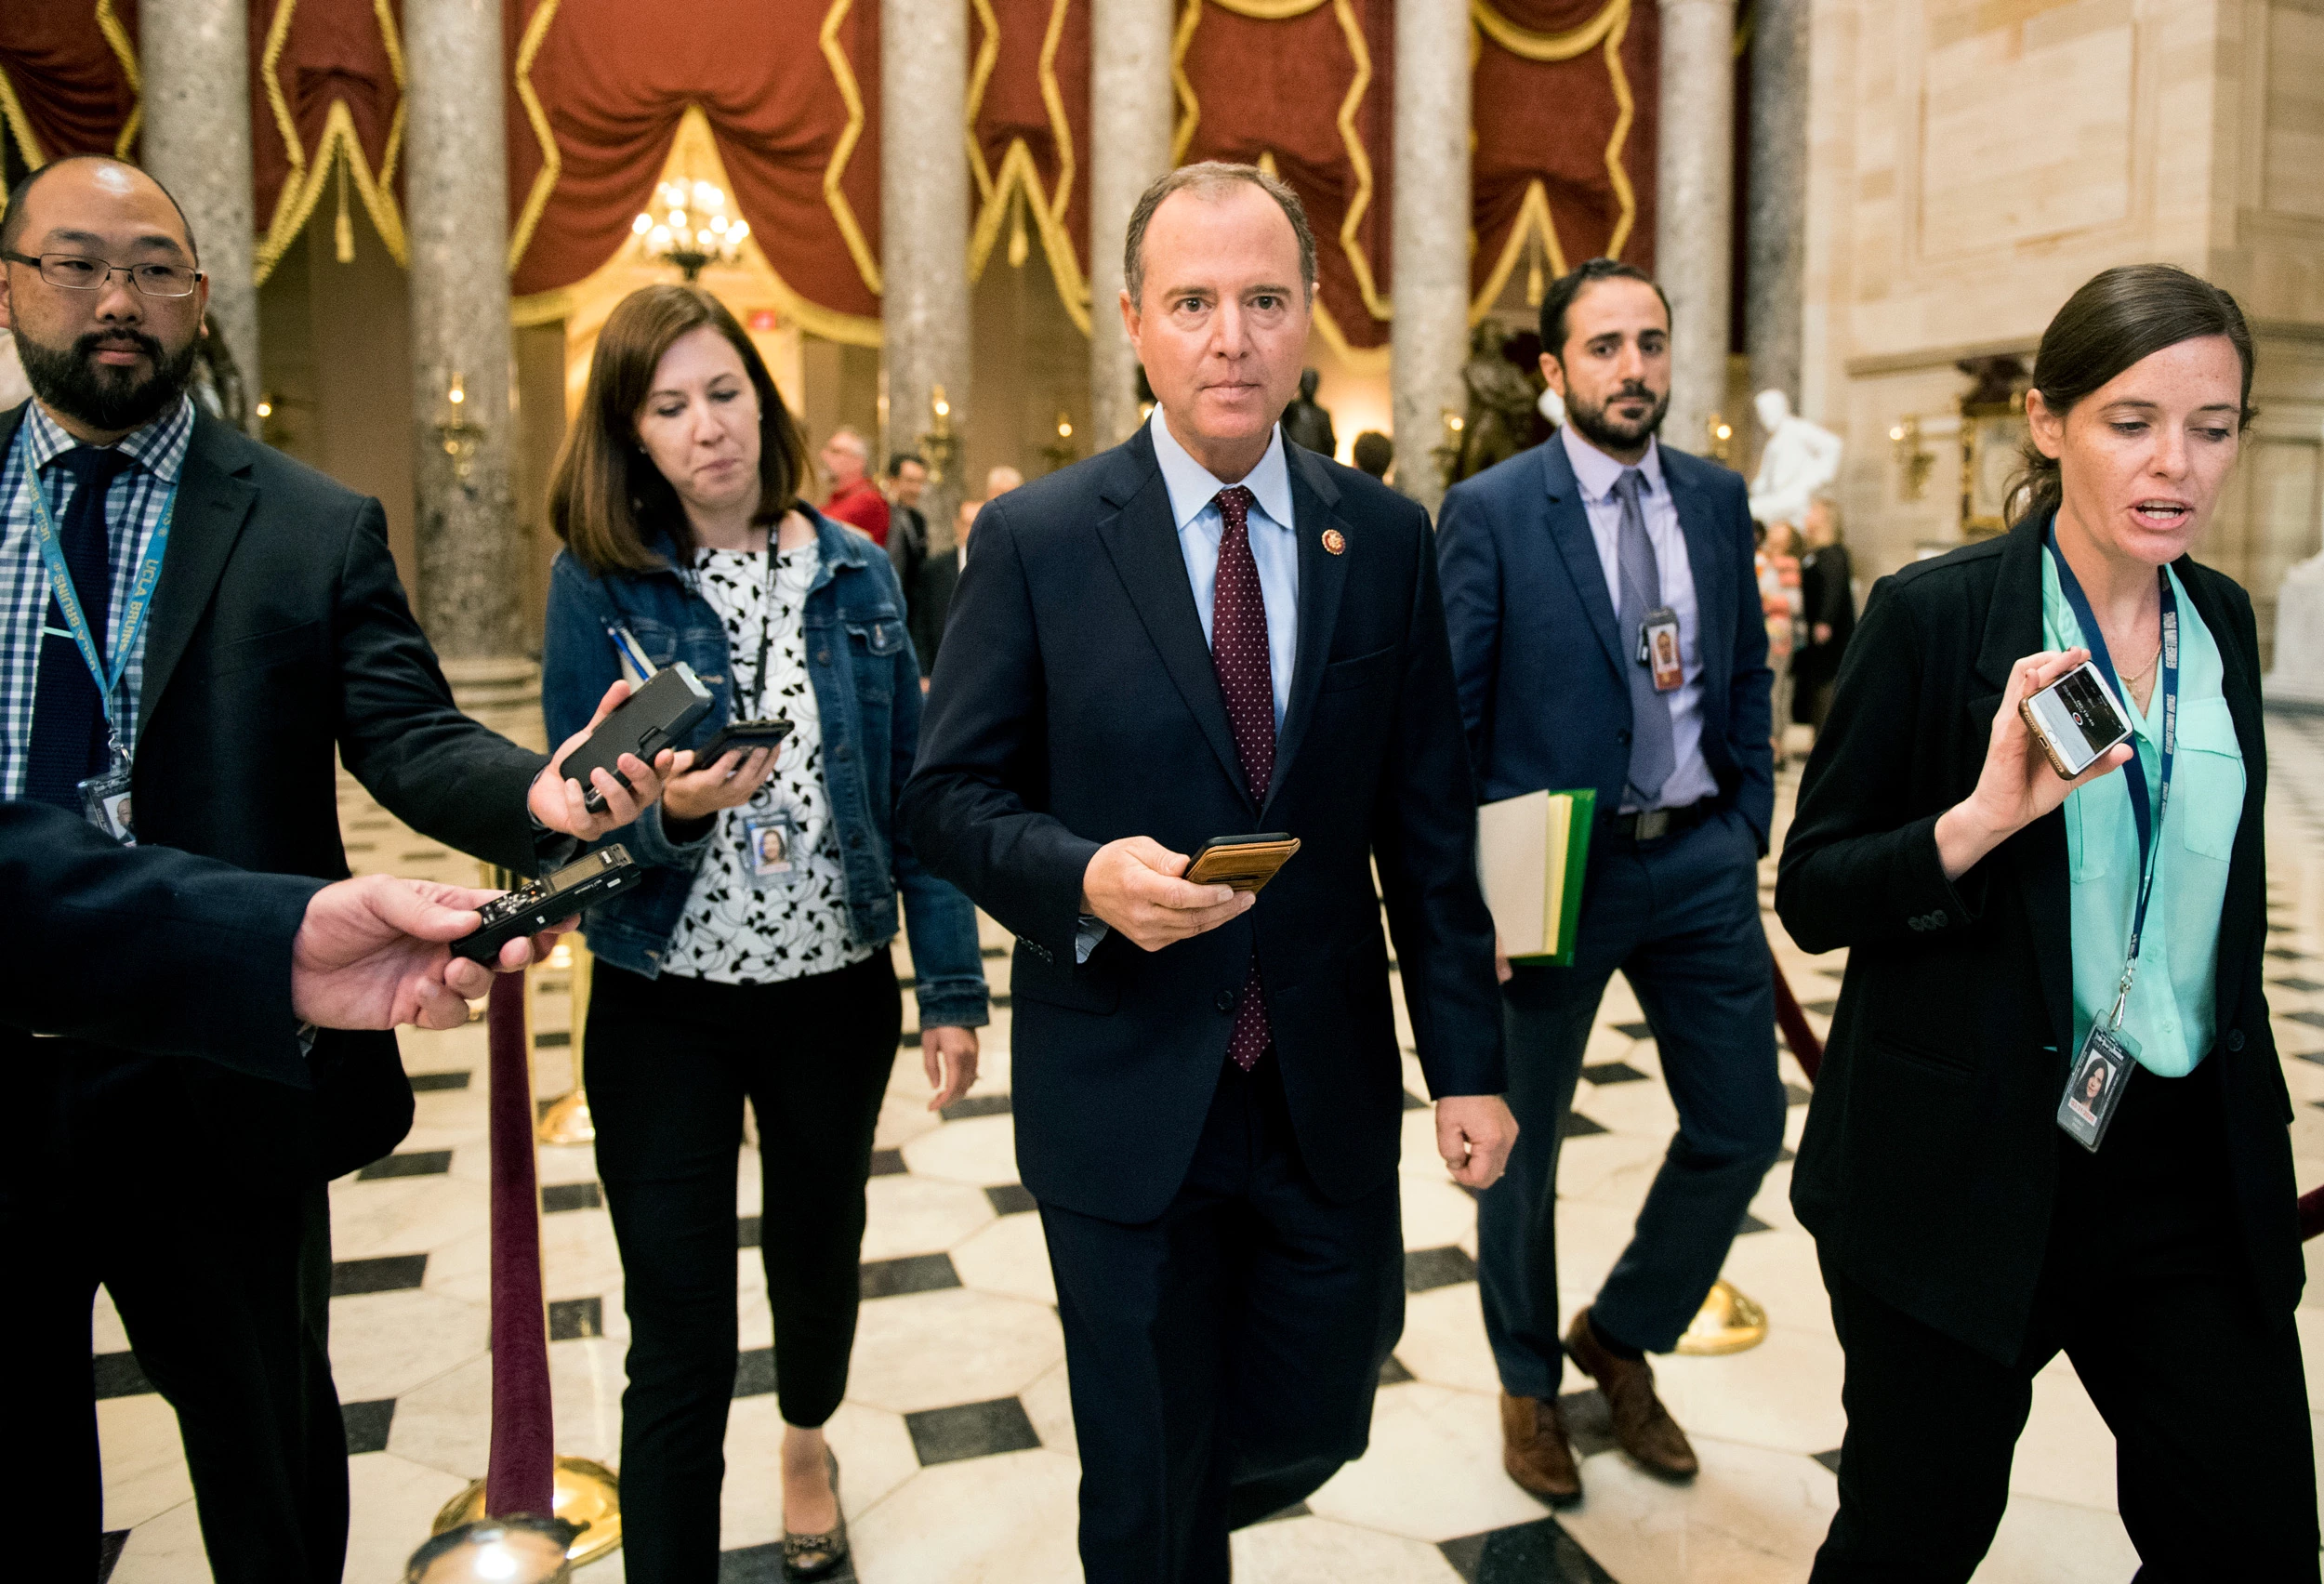 UNITED STATES - SEPTEMBER 24: House Intelligence Committee chairman Adam Schiff, D-Calif., arrives for a meeting of the House chairmen to discuss impeachment in Speaker Pelosi's office on Tuesday, Sept. 24, 2019. (Photo By Bill Clark/CQ Roll Call via AP Images)